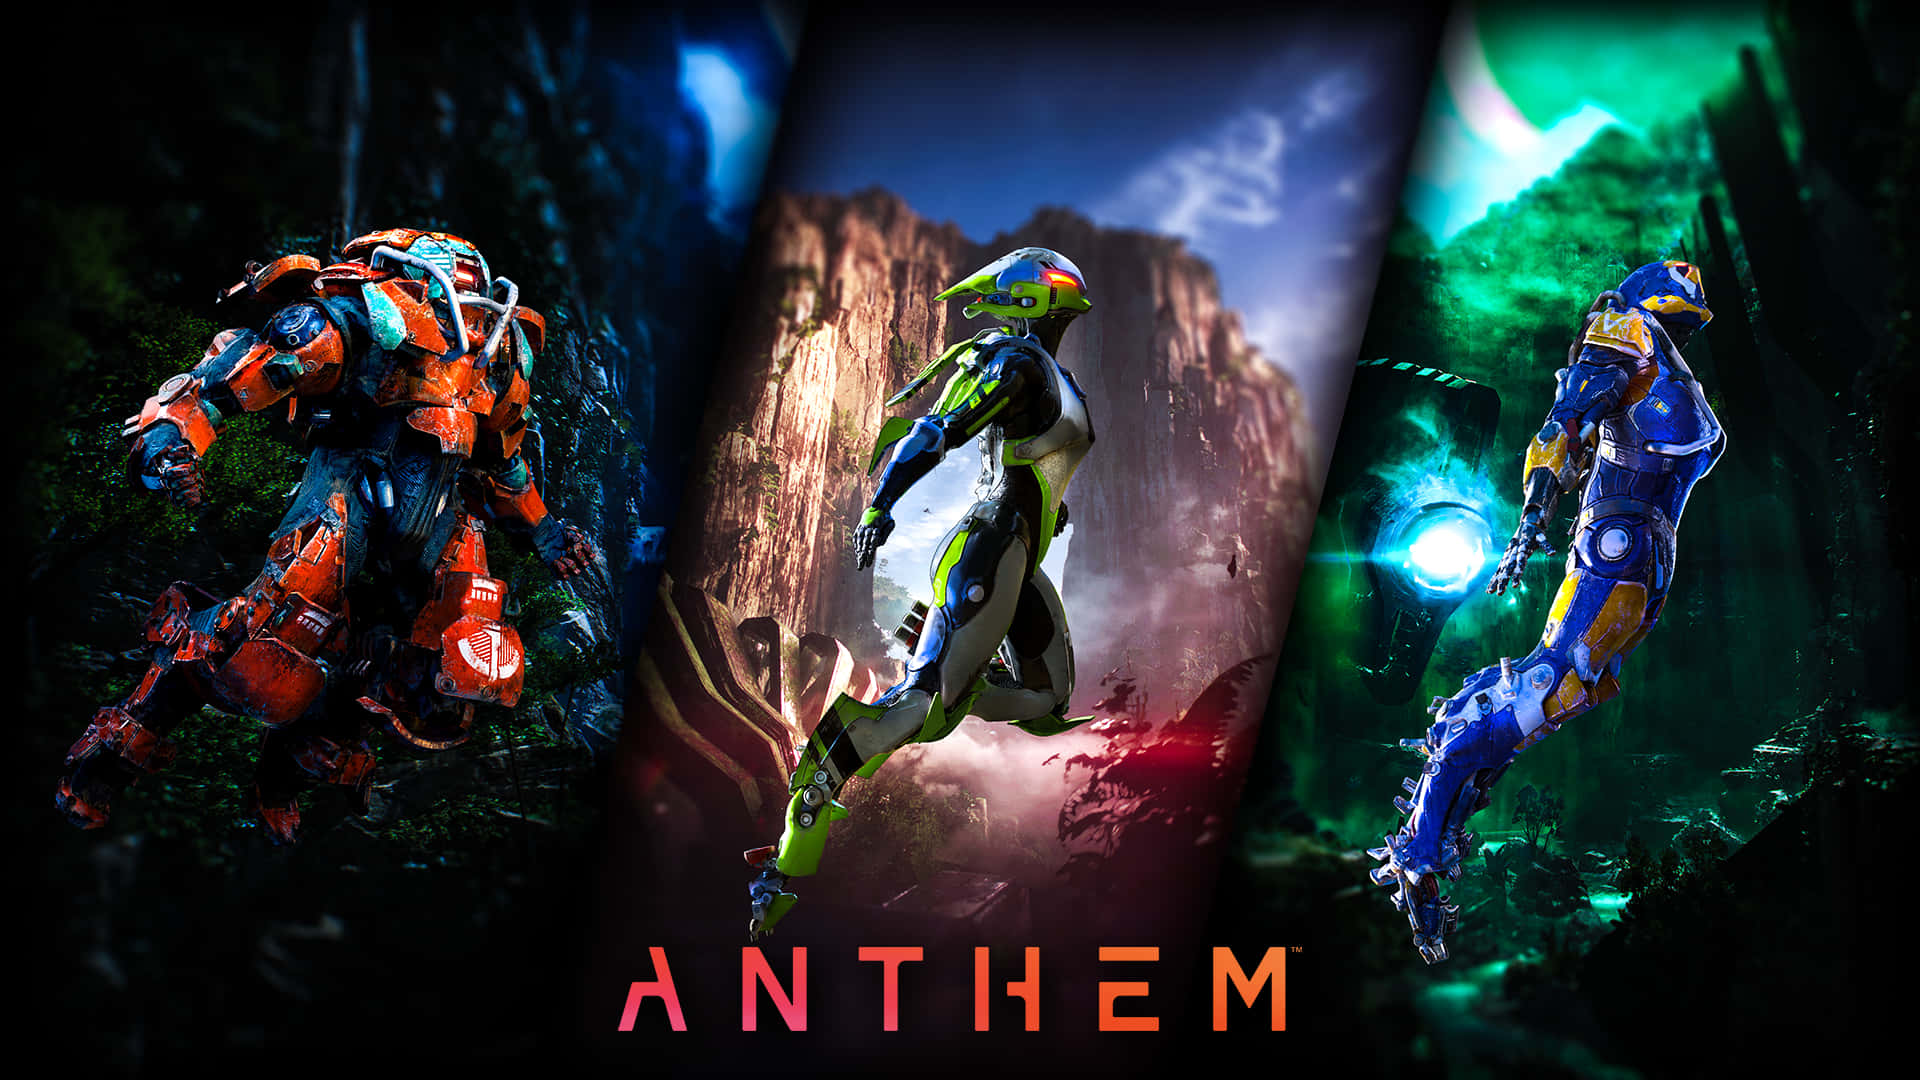 Join the Freelancers and explore the world of Anthem! Wallpaper